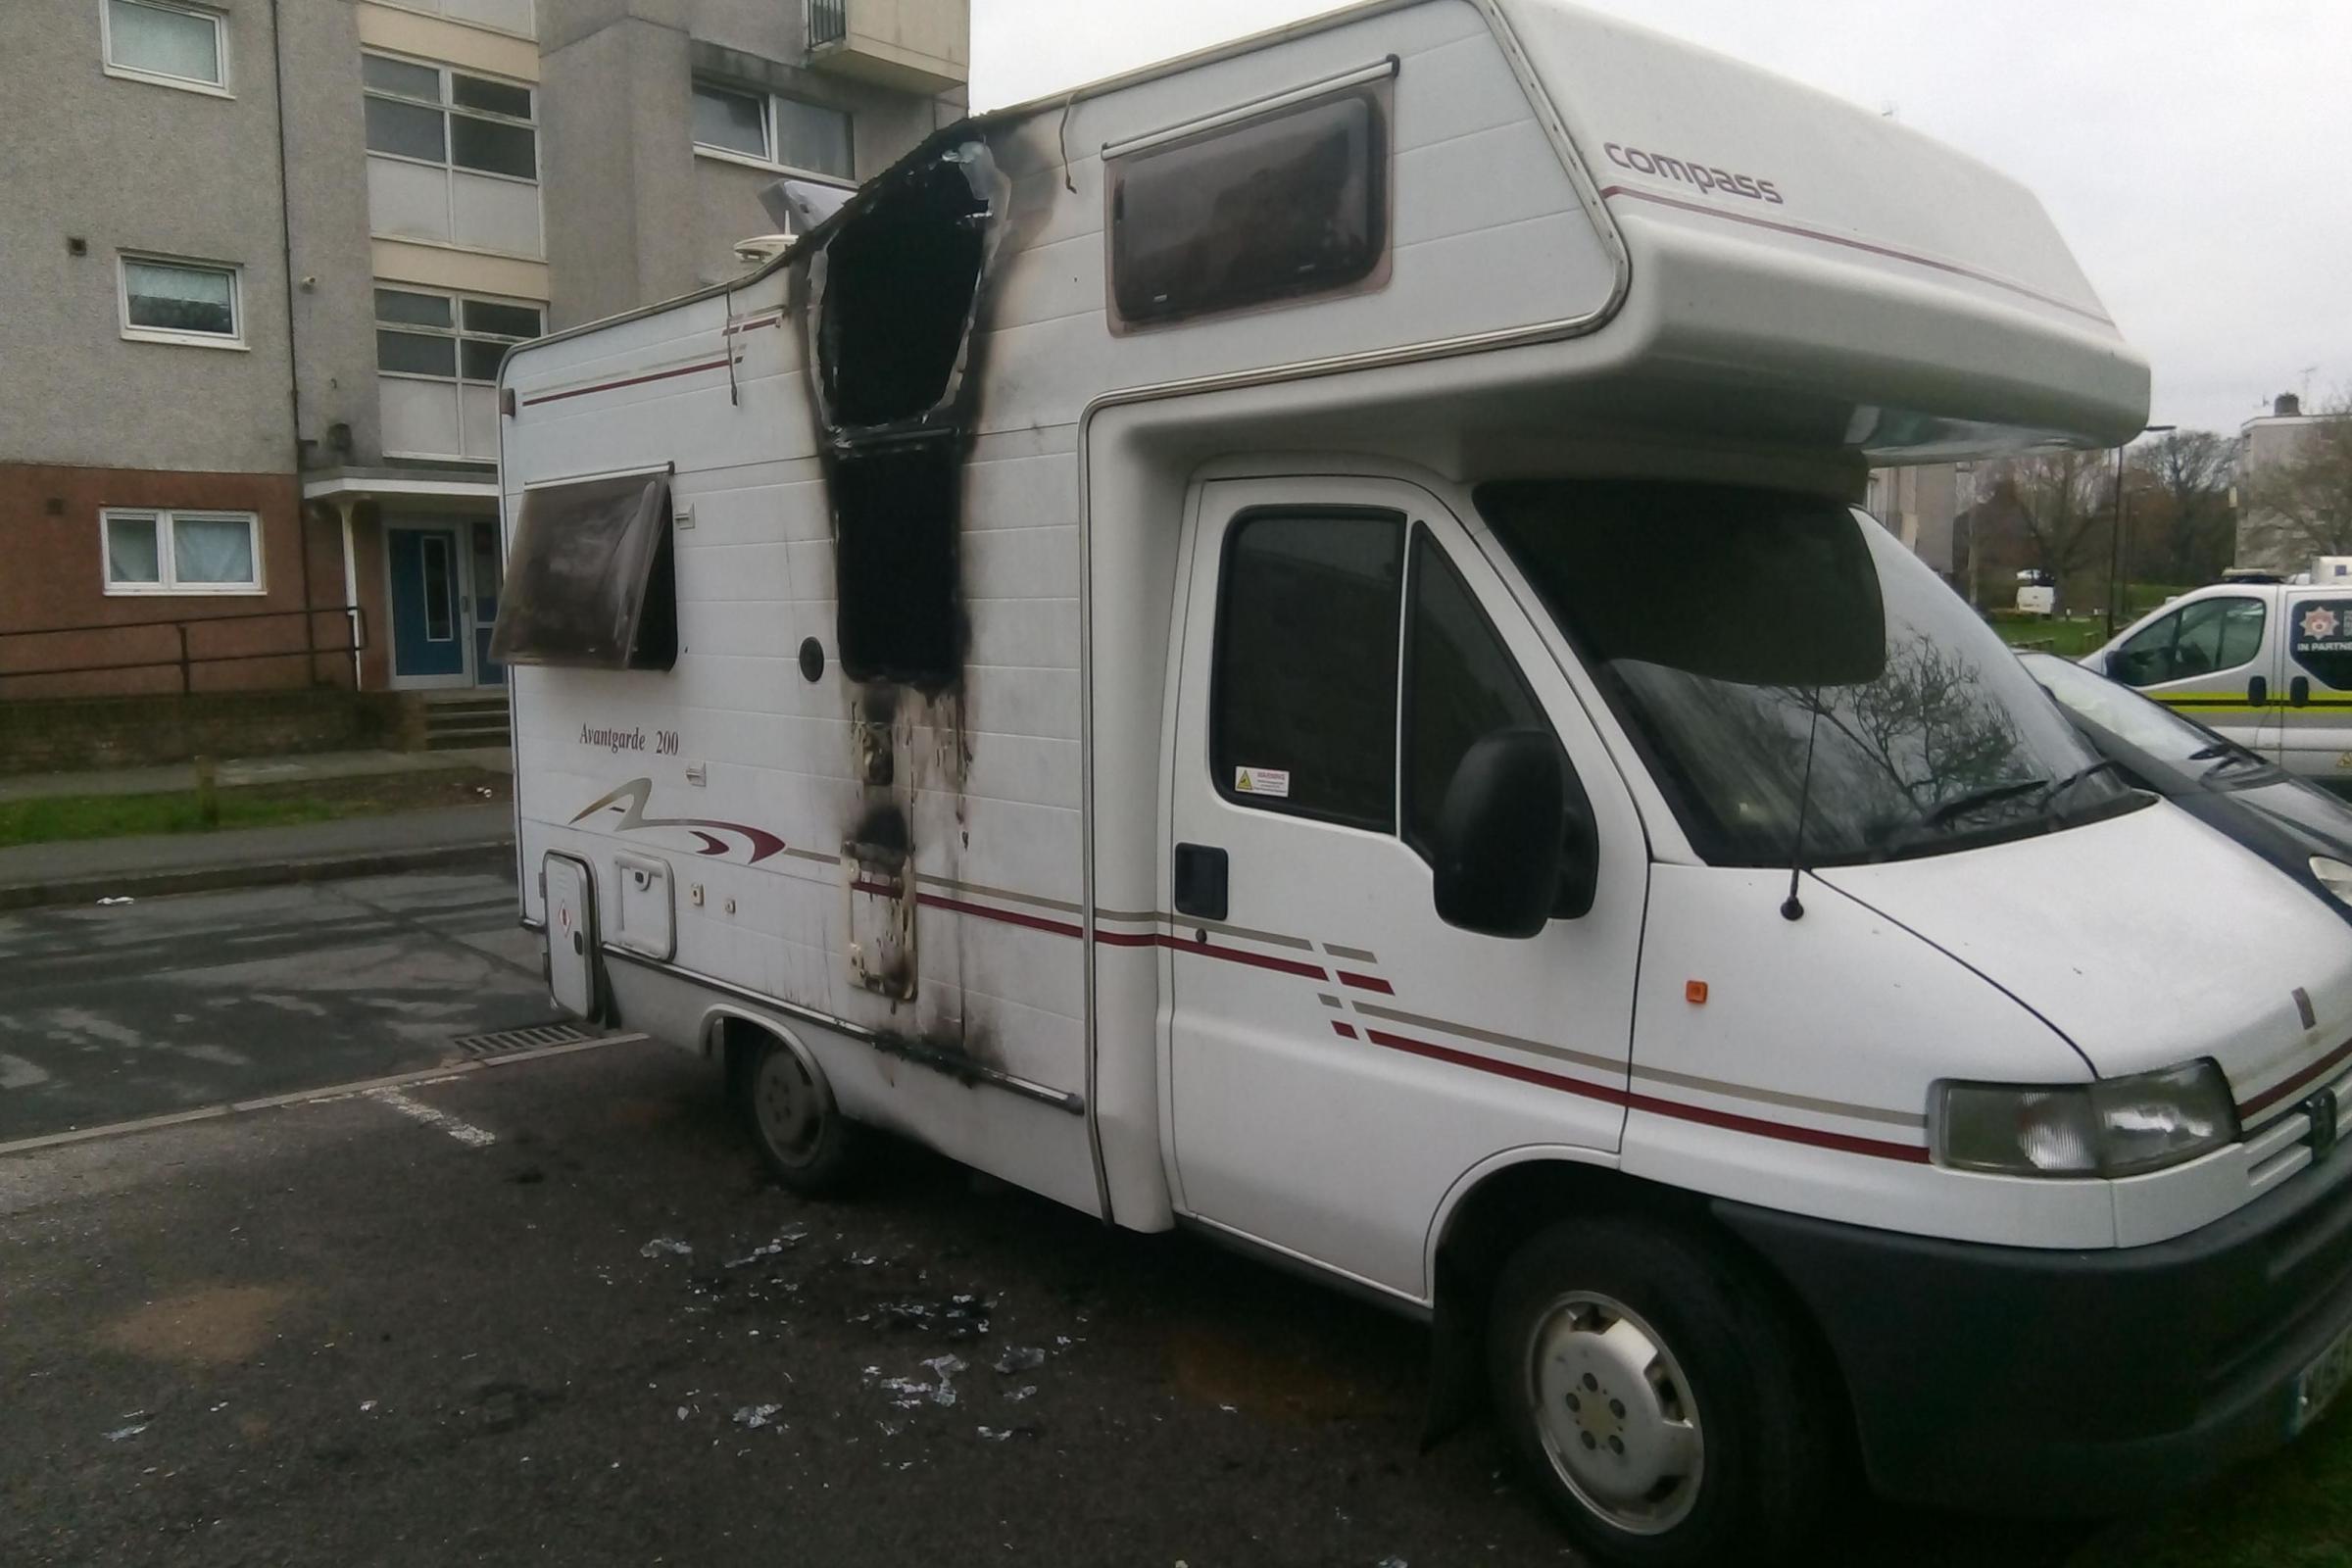 PHOTOS: Firefighters tackle another motorhome fire in Southampton